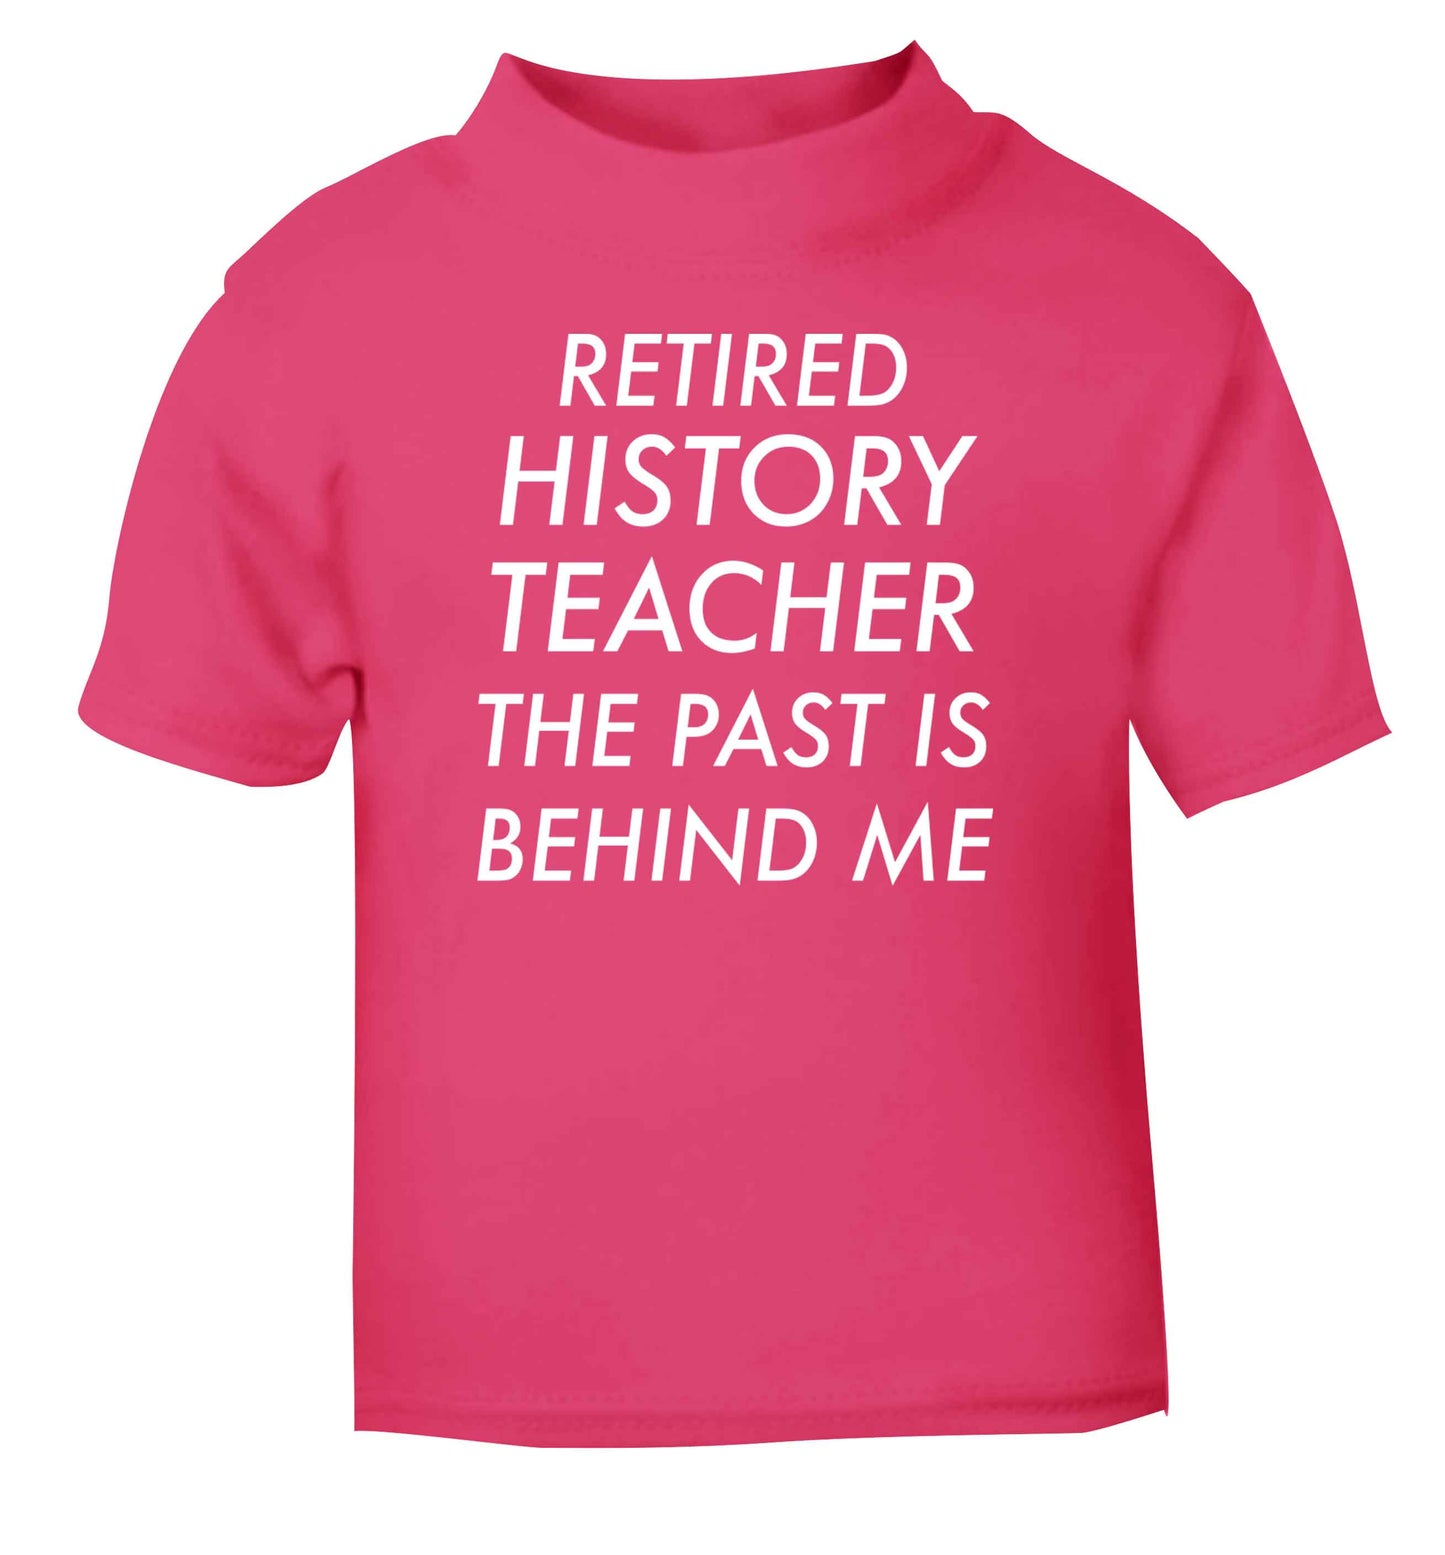 Retired history teacher the past is behind me pink Baby Toddler Tshirt 2 Years